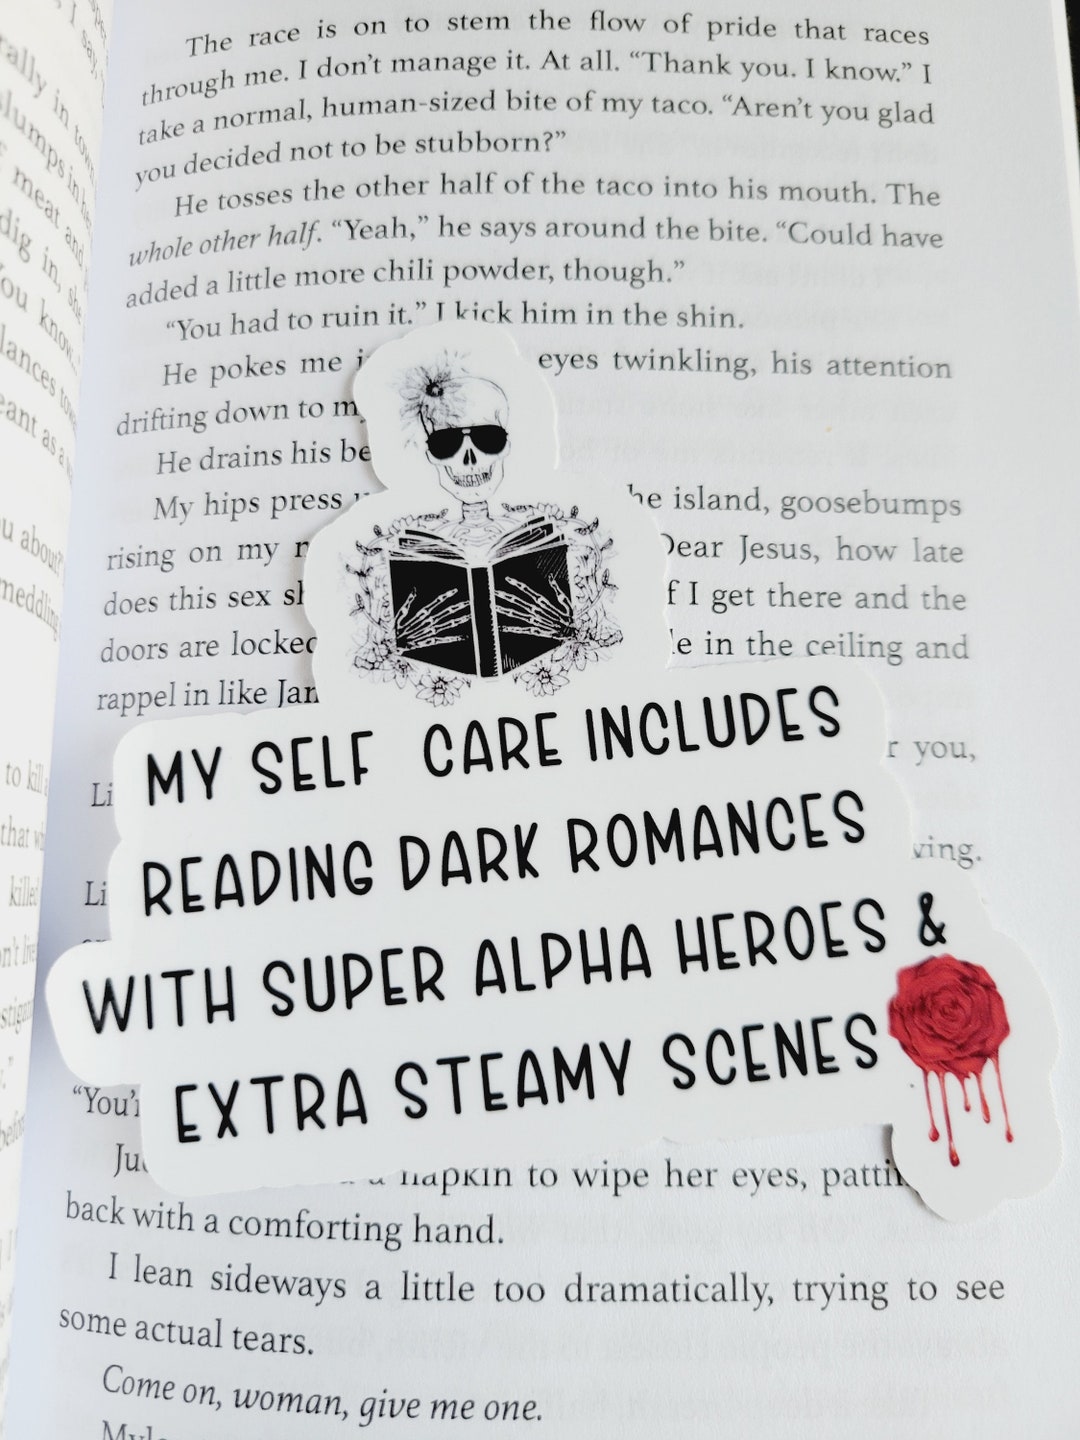 Book Related Sticker-my Self Care picture